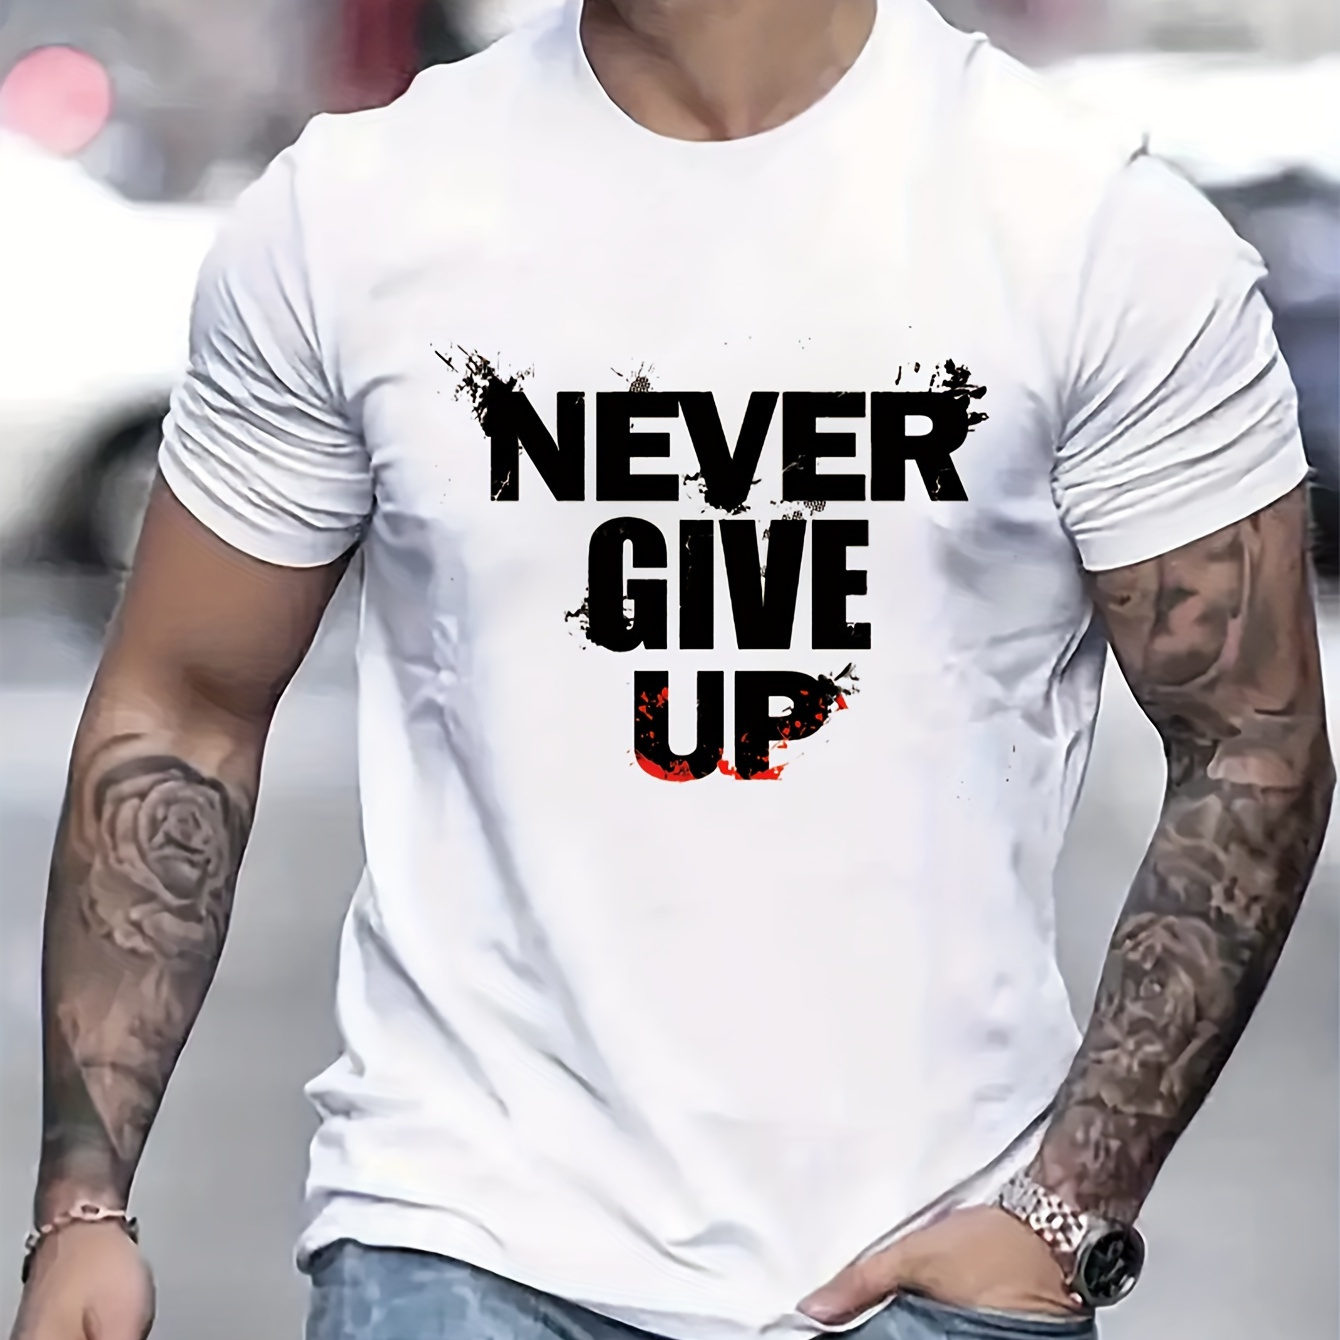 

Never Give Up Letter Print Men's Short Sleeve T-shirts, Comfy Casual Elastic Crew Neck Tops For Men's Outdoor Activities